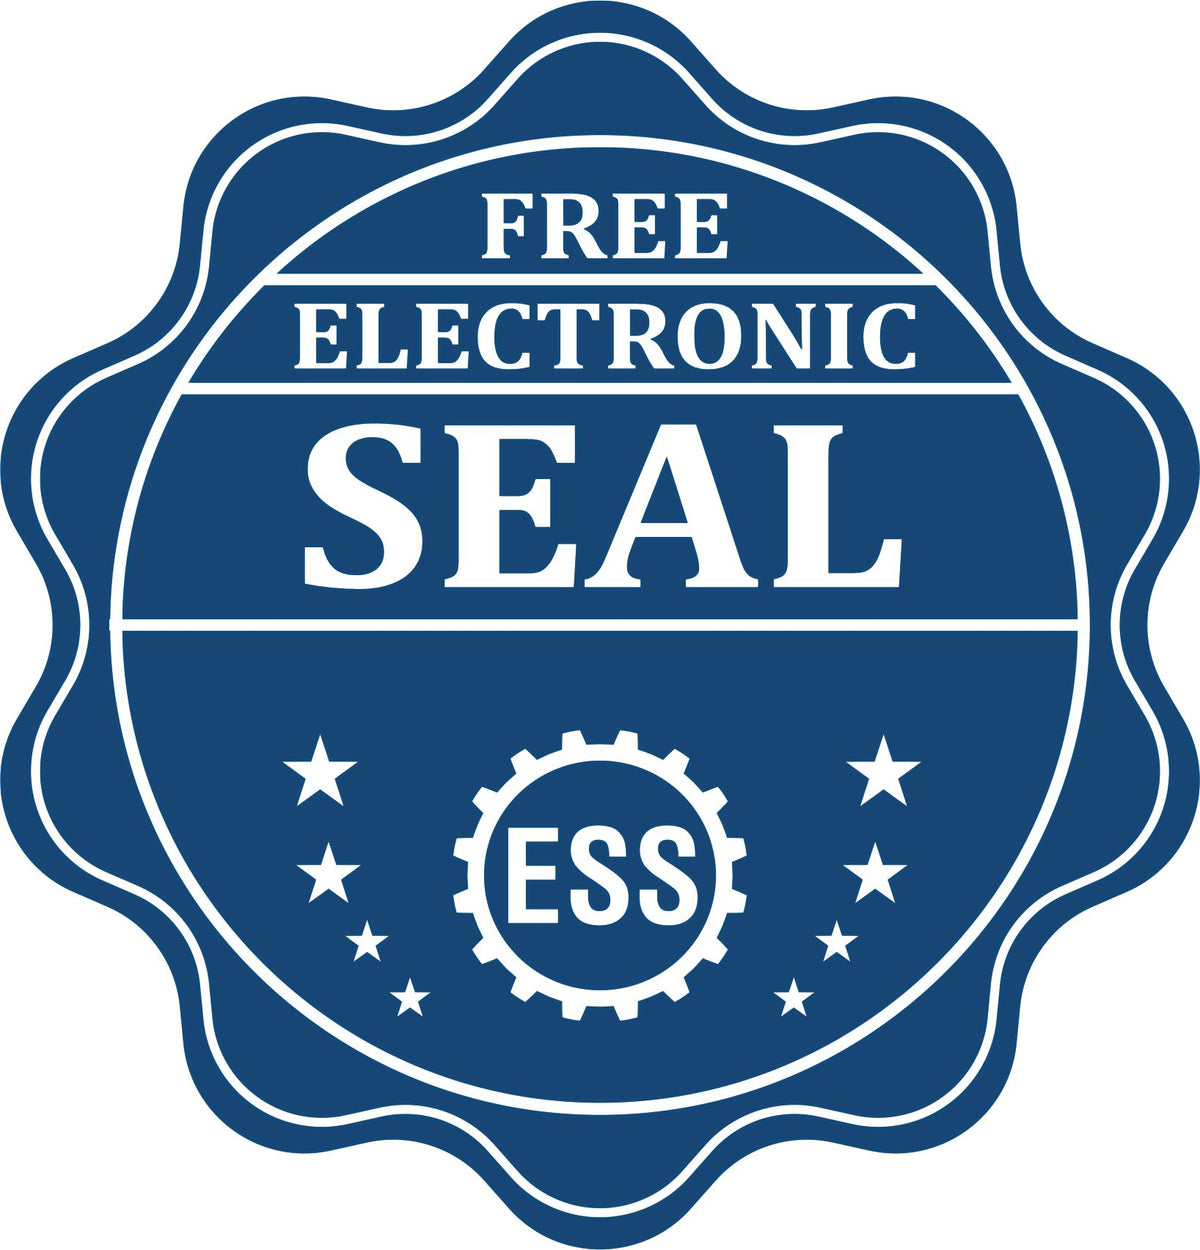 A badge showing a free electronic seal for the Premium MaxLight Pre-Inked Nevada Engineering Stamp with stars and the ESS gear on the emblem.